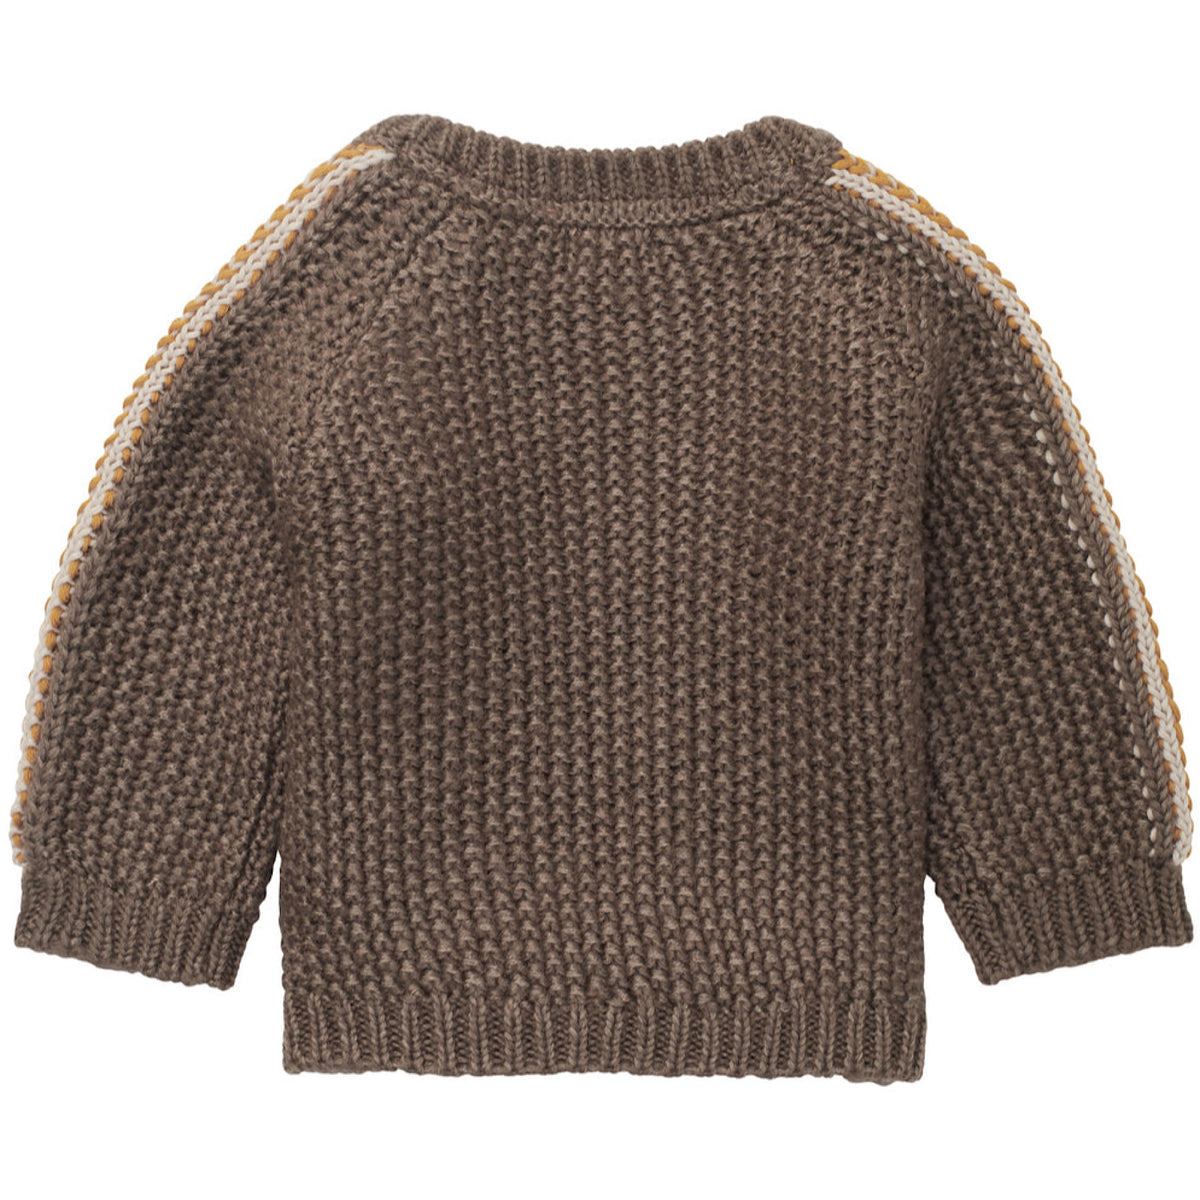 Knit Sweater with Wooden Buttons